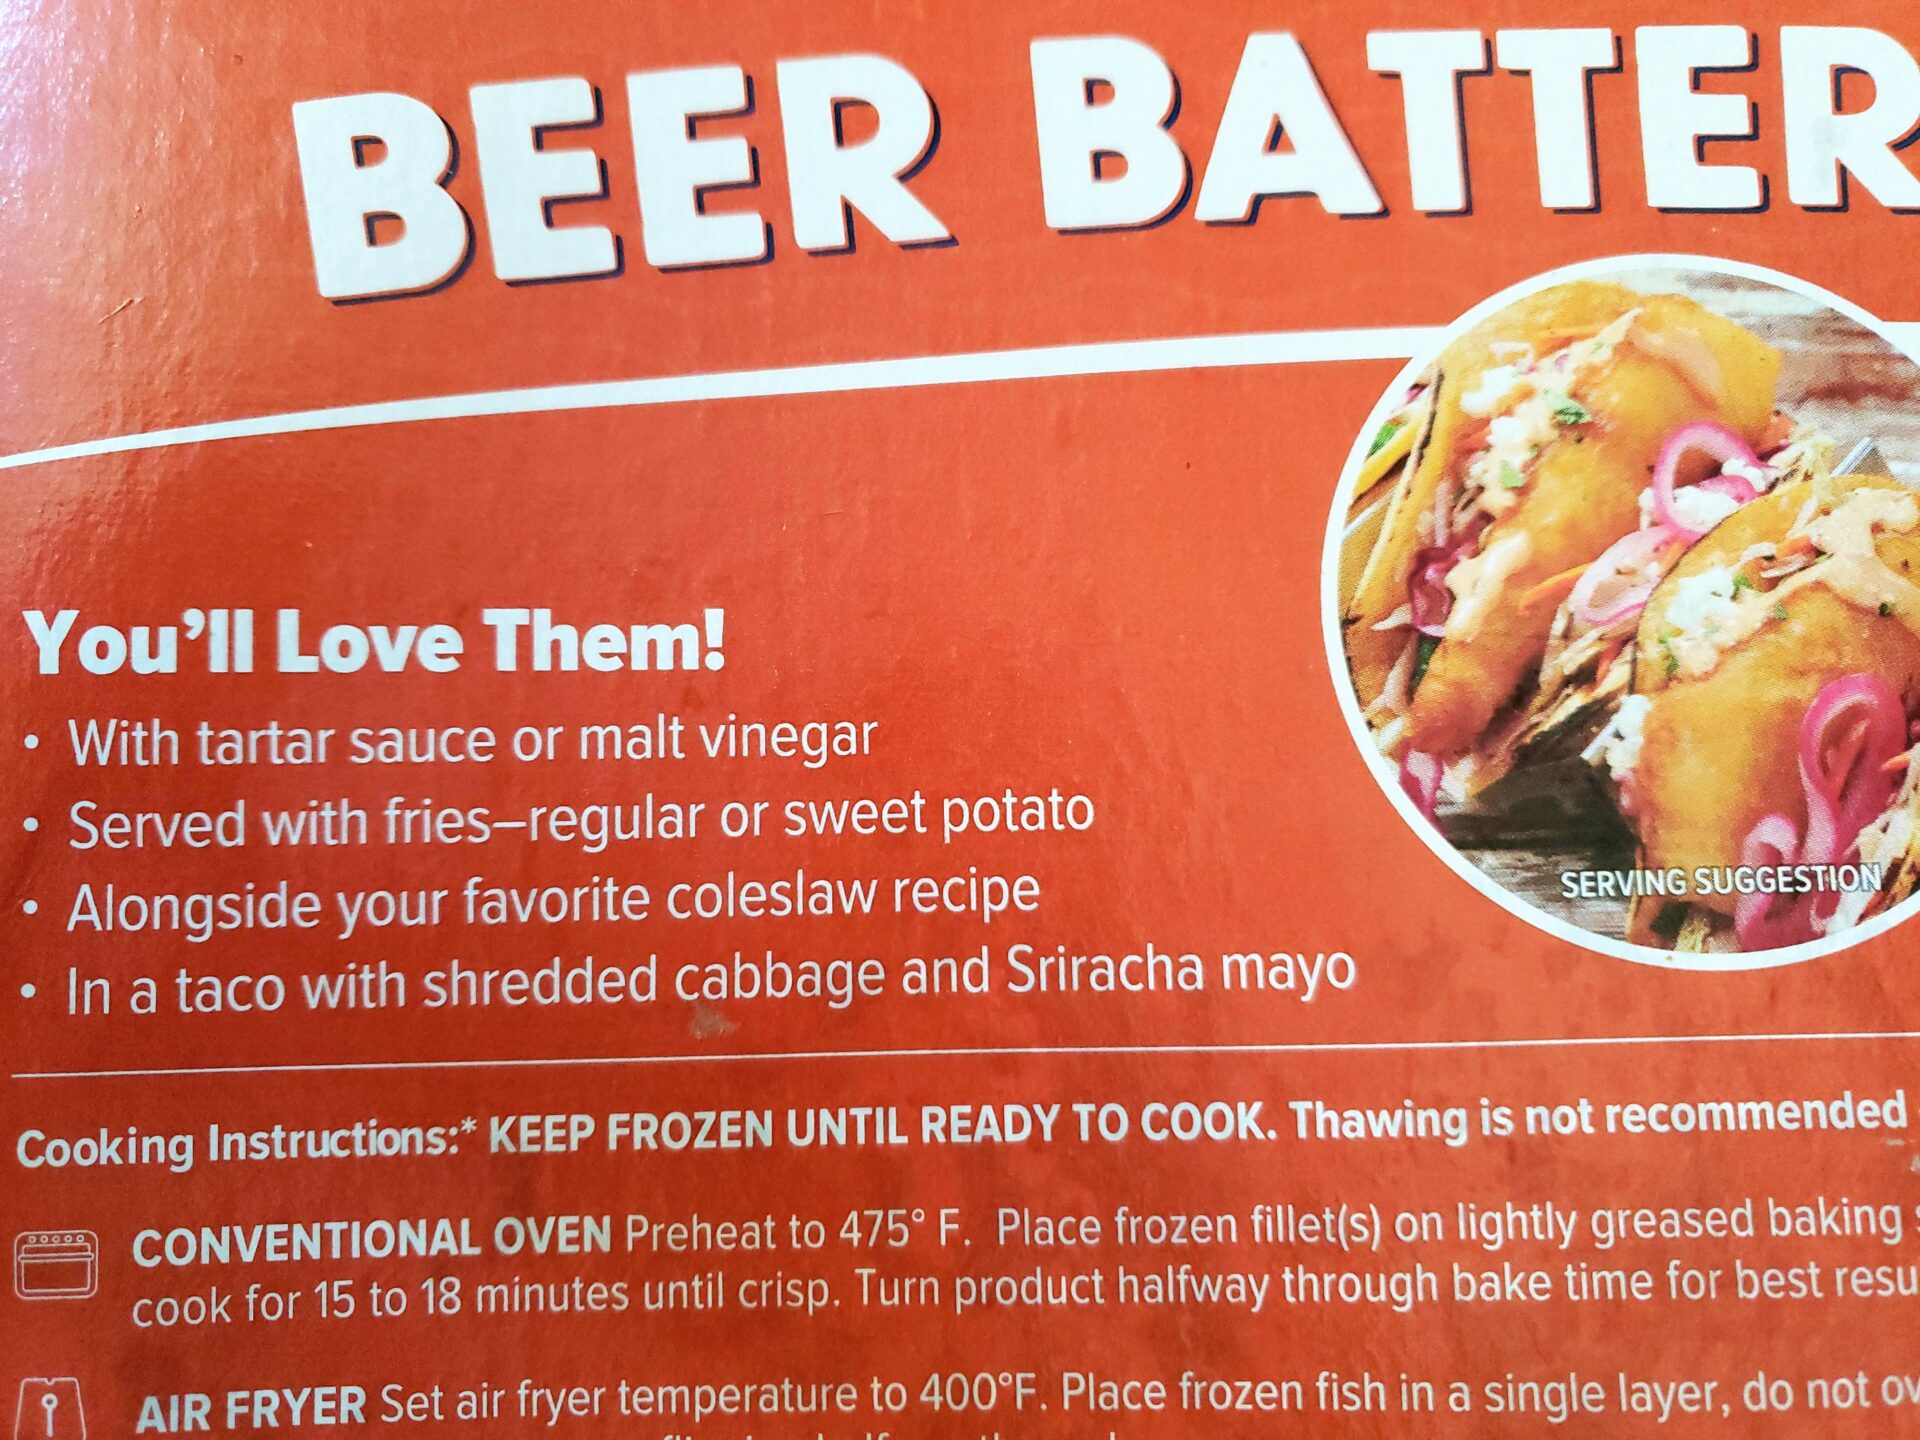 Costco-Fried-Beer-Battered-Cod-Serving-Suggestions